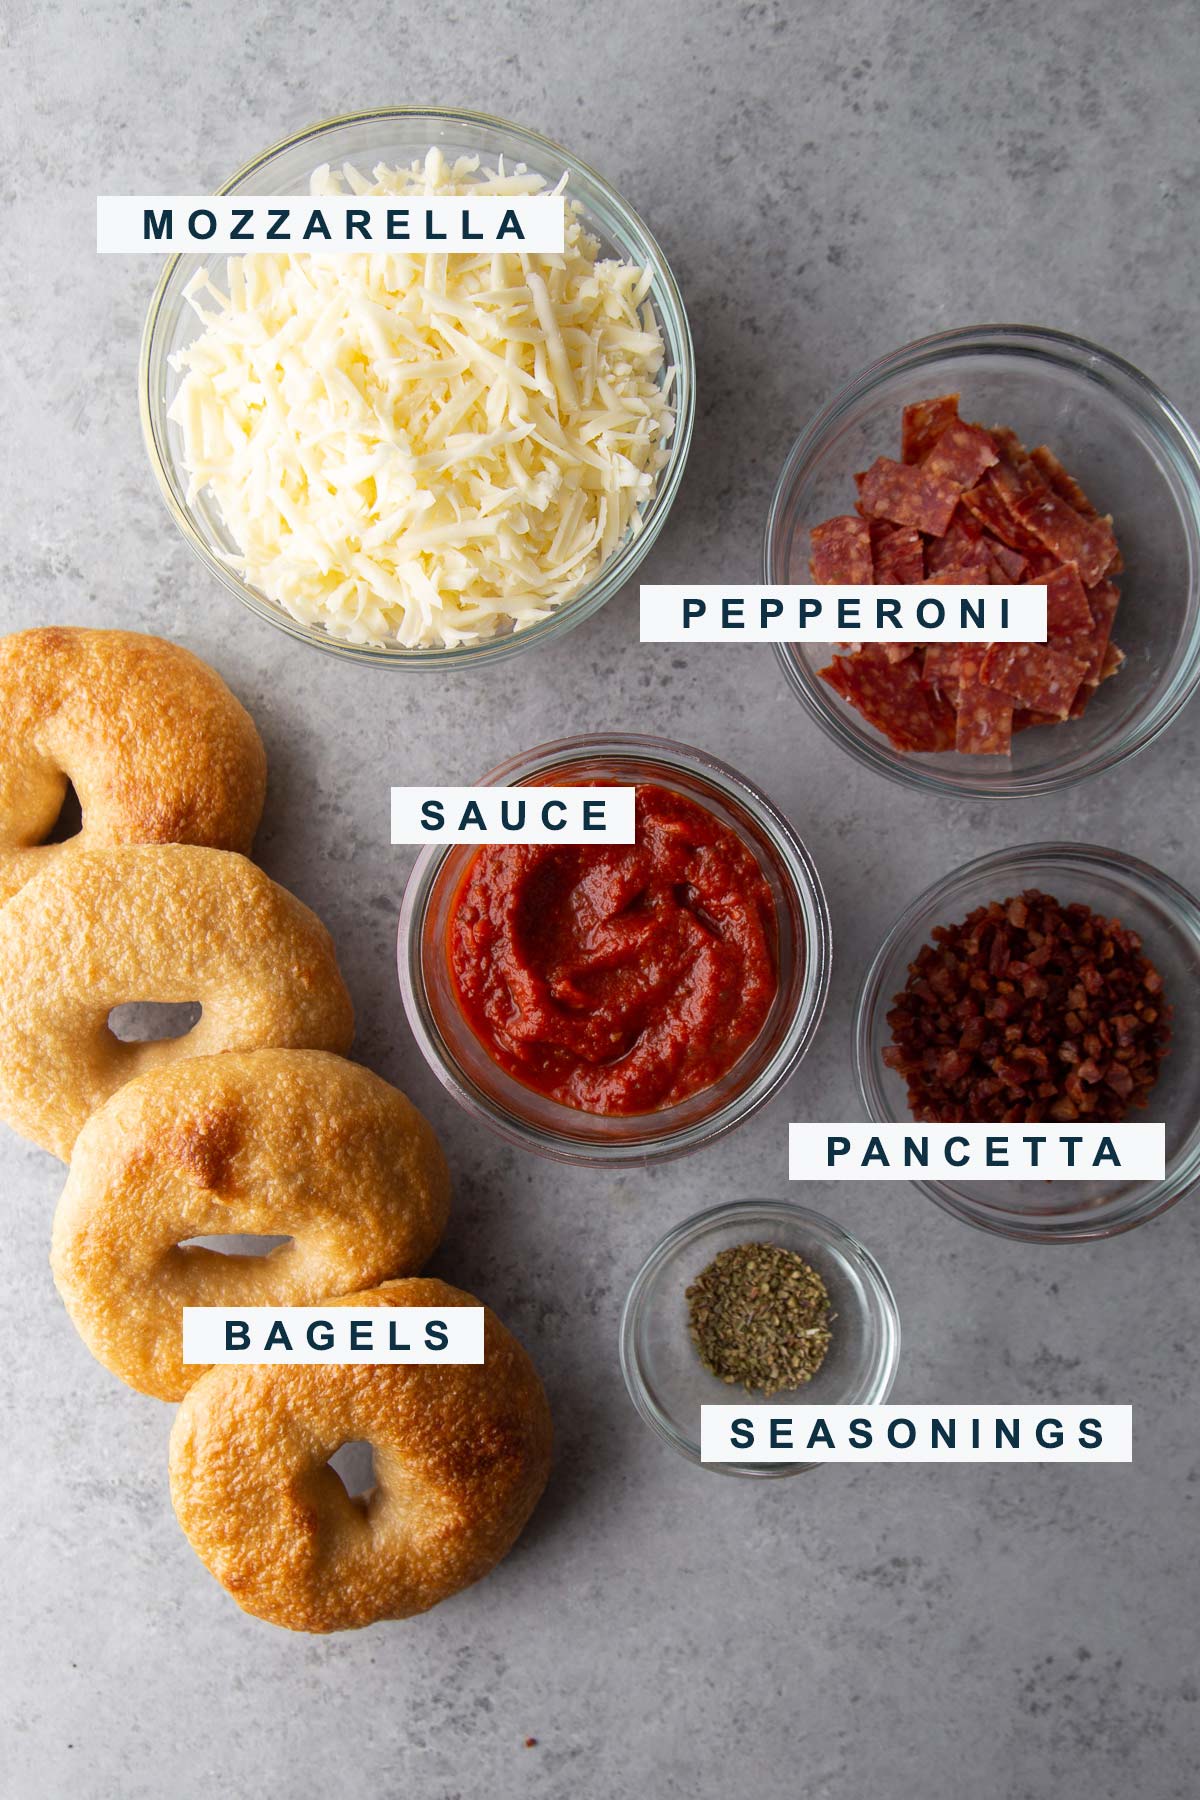 pizza bagel components are bagels, mozzarella cheese, sauce, and pepperoni.